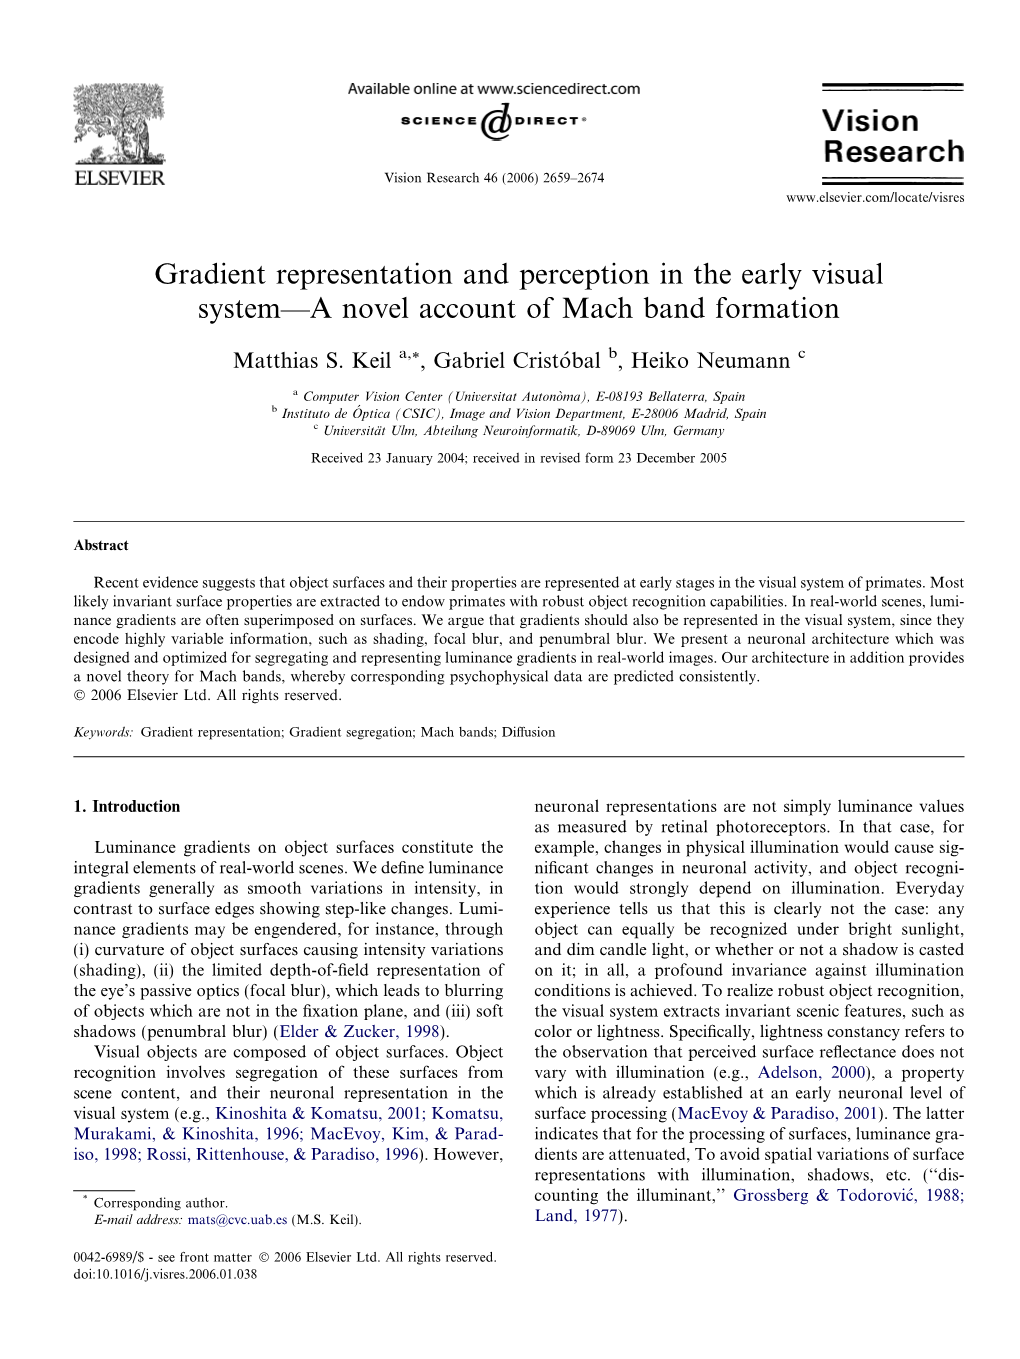 Gradient Representation and Perception in the Early Visual System—A Novel Account of Mach Band Formation